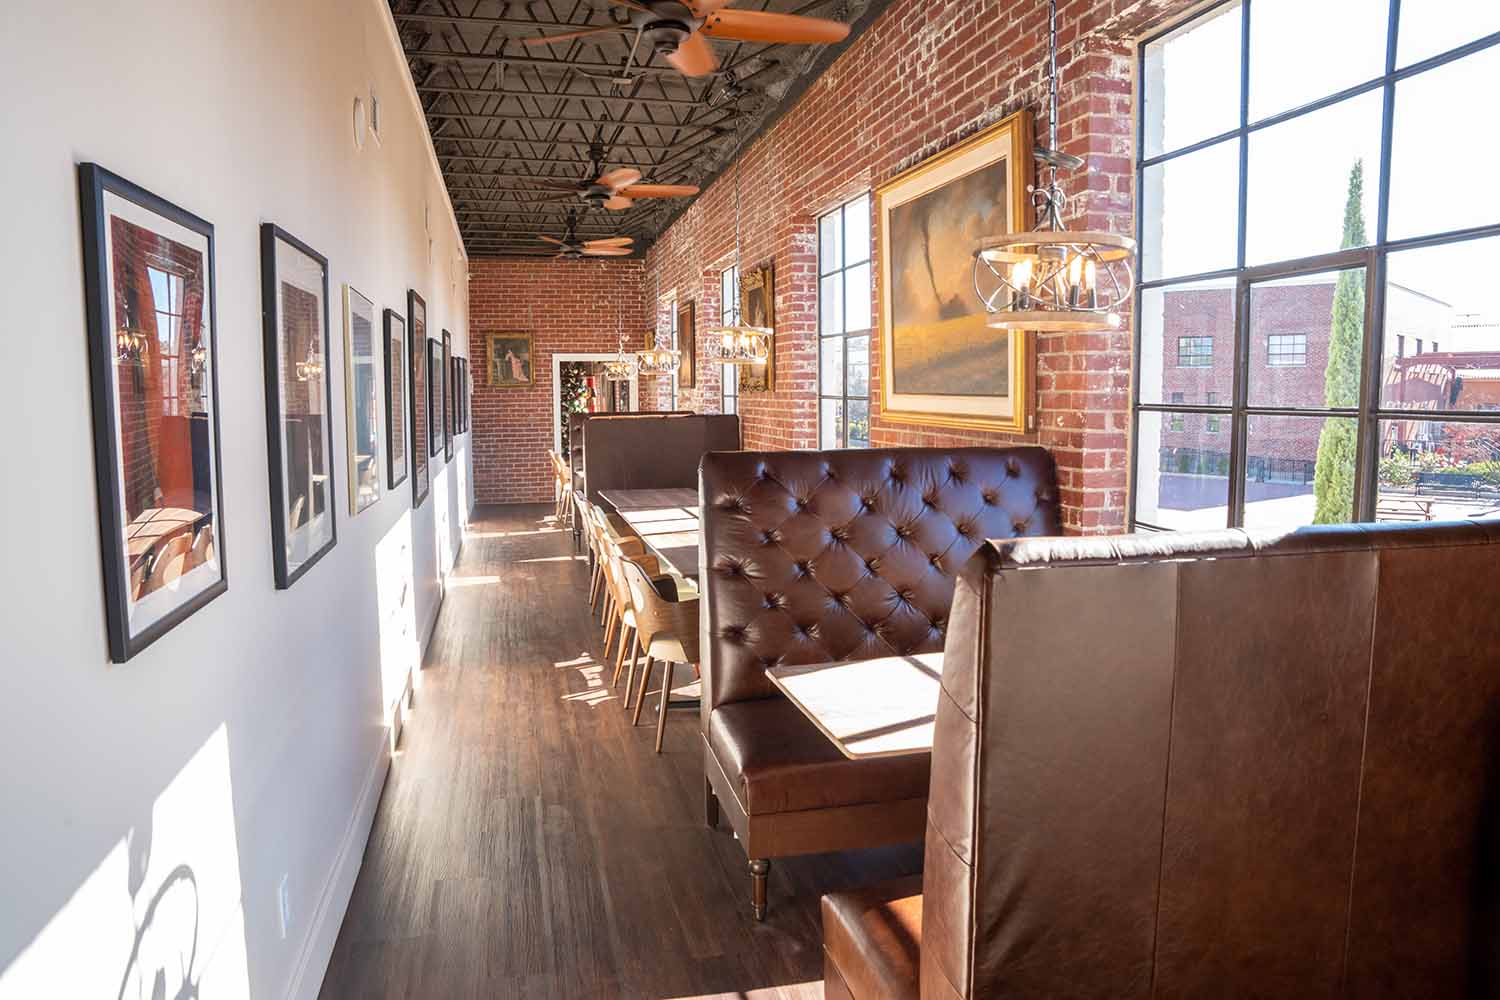 Interior seating at Nutwood Winery's downtown location in LaGrange, Georgia.